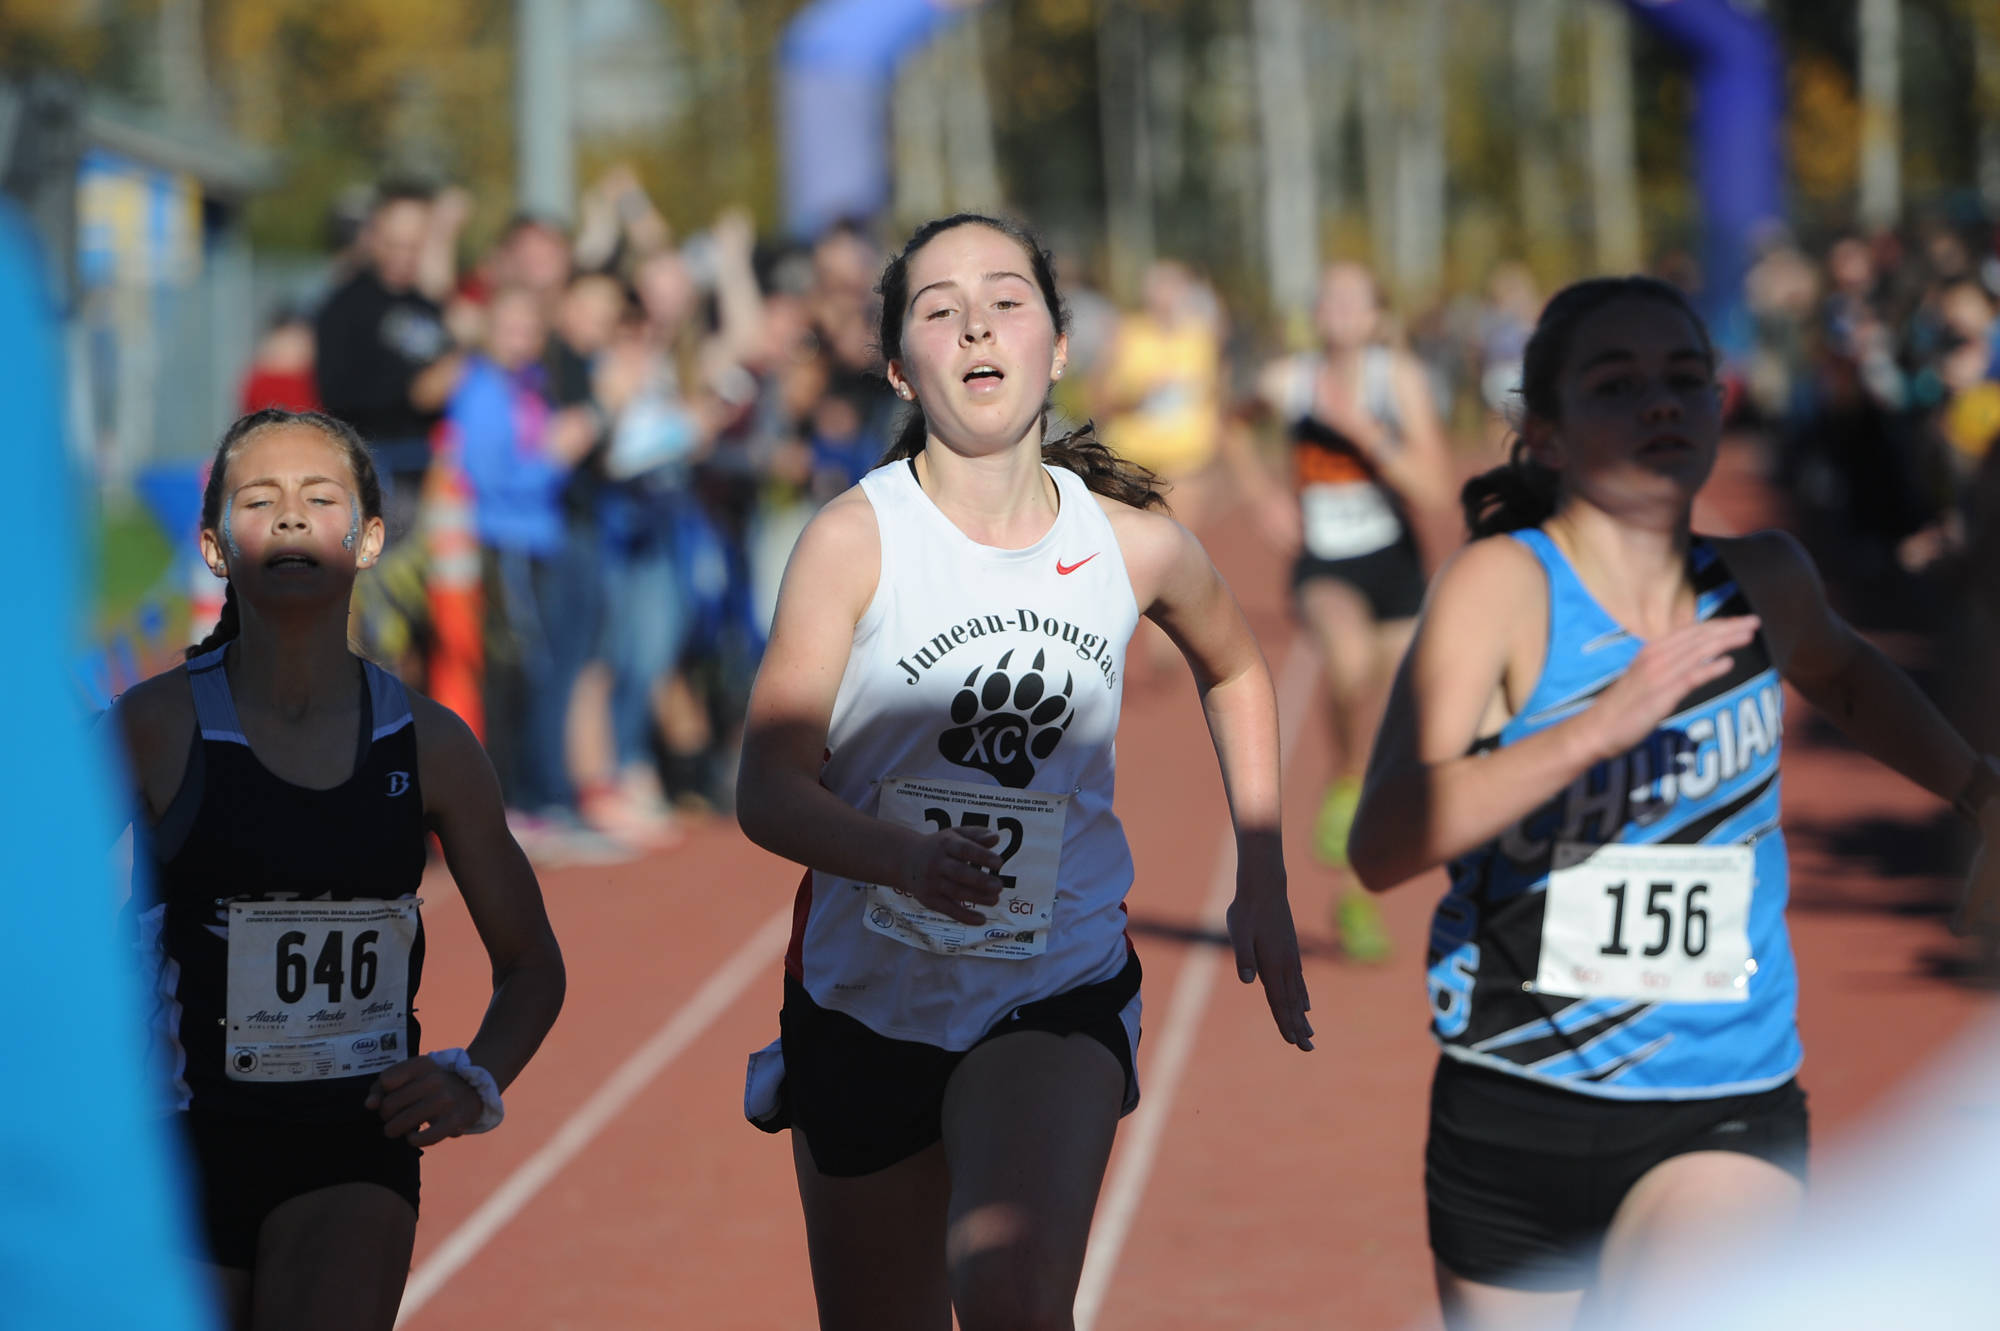 Juneau-Douglas High School: Yadaat.at Kalé’s Katie McKenna finishes in 17th place in the 2018 ASAA Division I state cross country championships next to Soldotna’s Jordan Strausbaugh, left, and Chugiak’s Breanna Day at Bartlett High School in Anchorage on Saturday, Sept. 28, 2018. (Michael Dinneen | For the Juneau Empire)